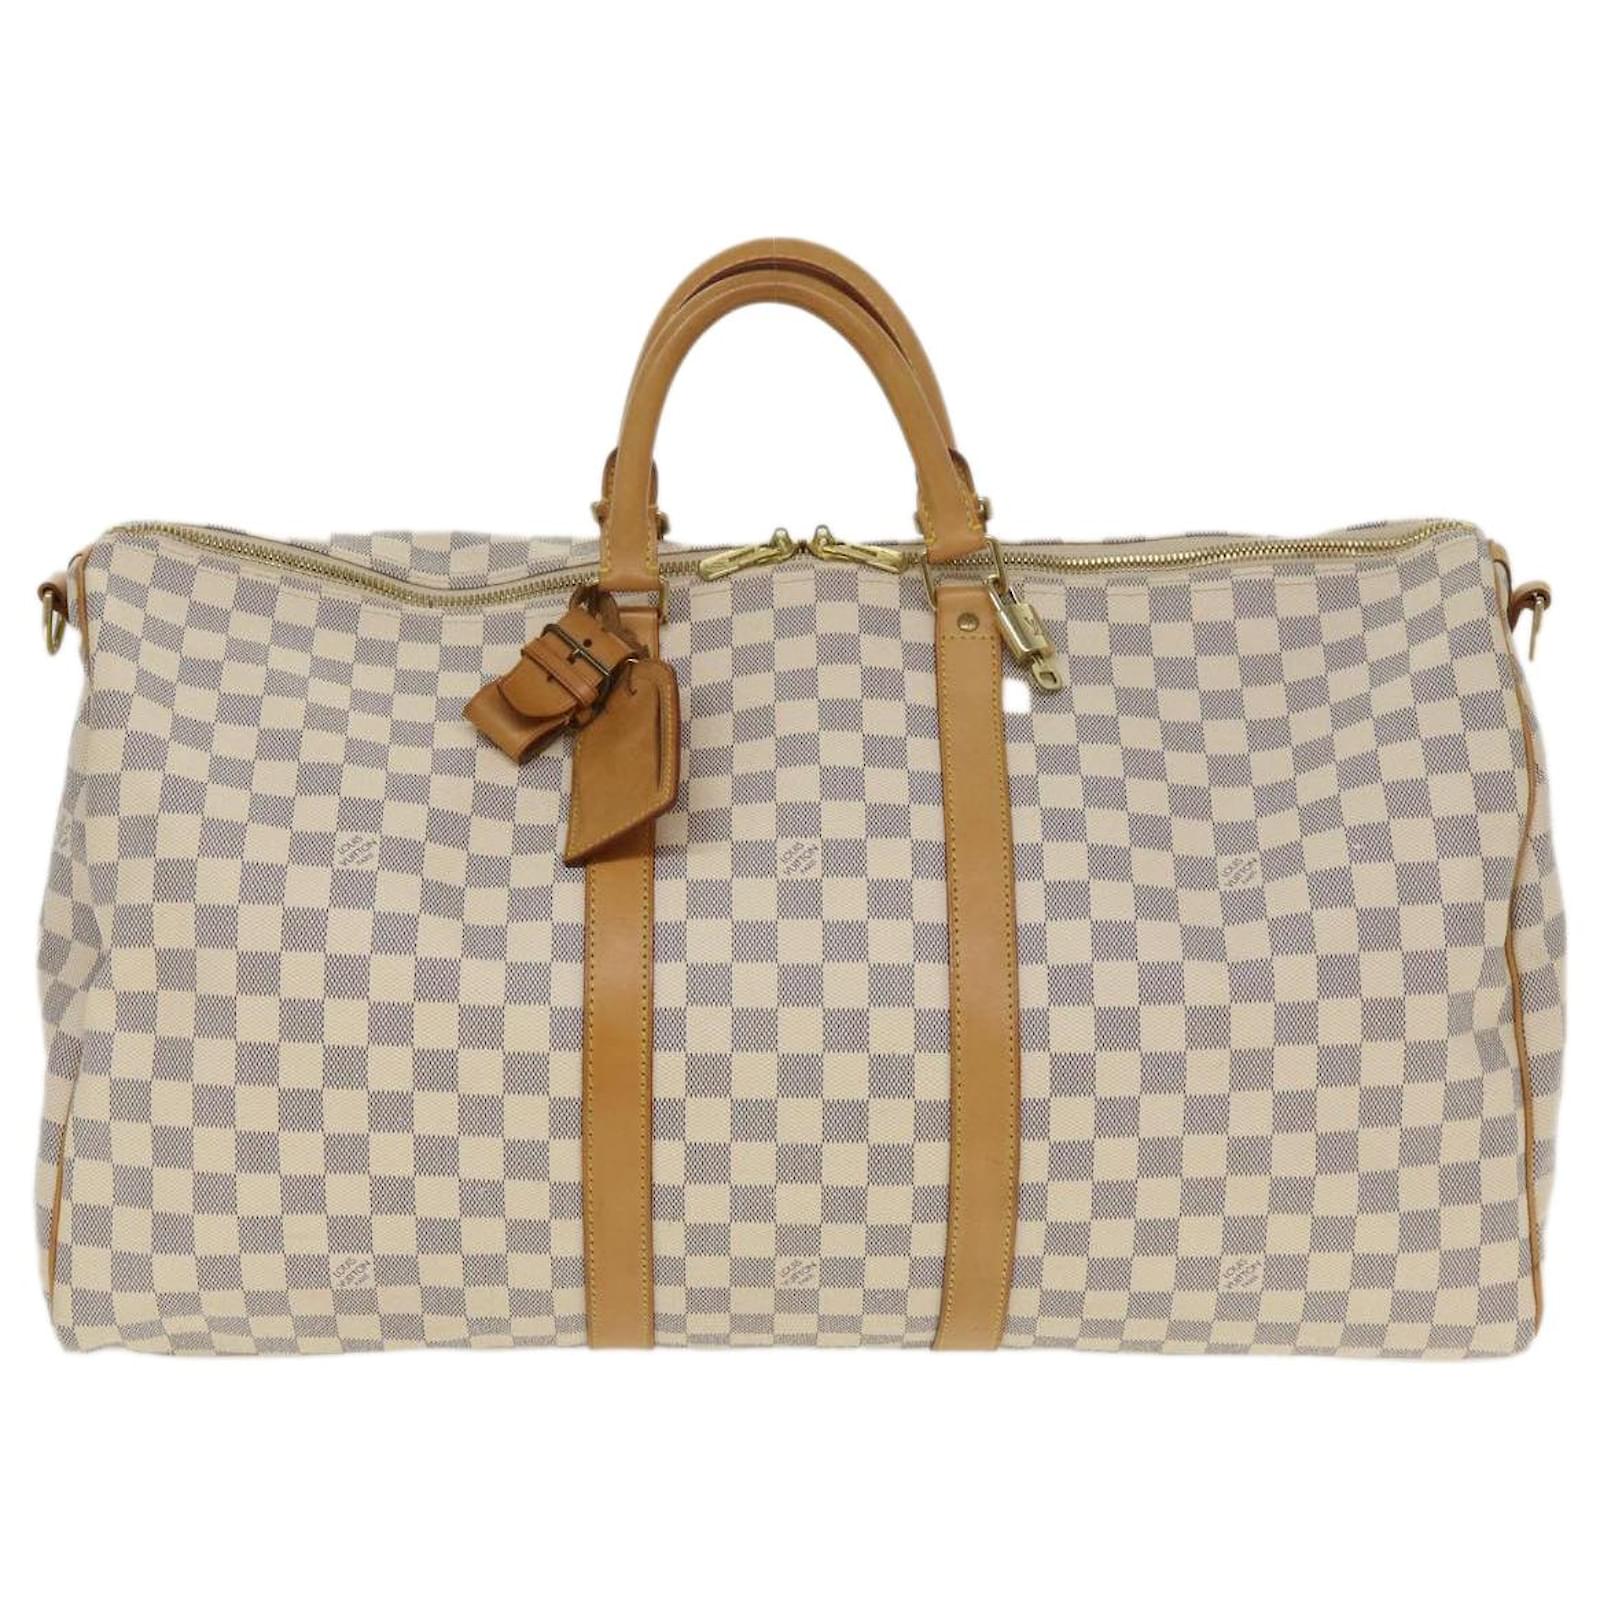 Louis Vuitton Keepall 55 Duffel in Damier Infini Leather with